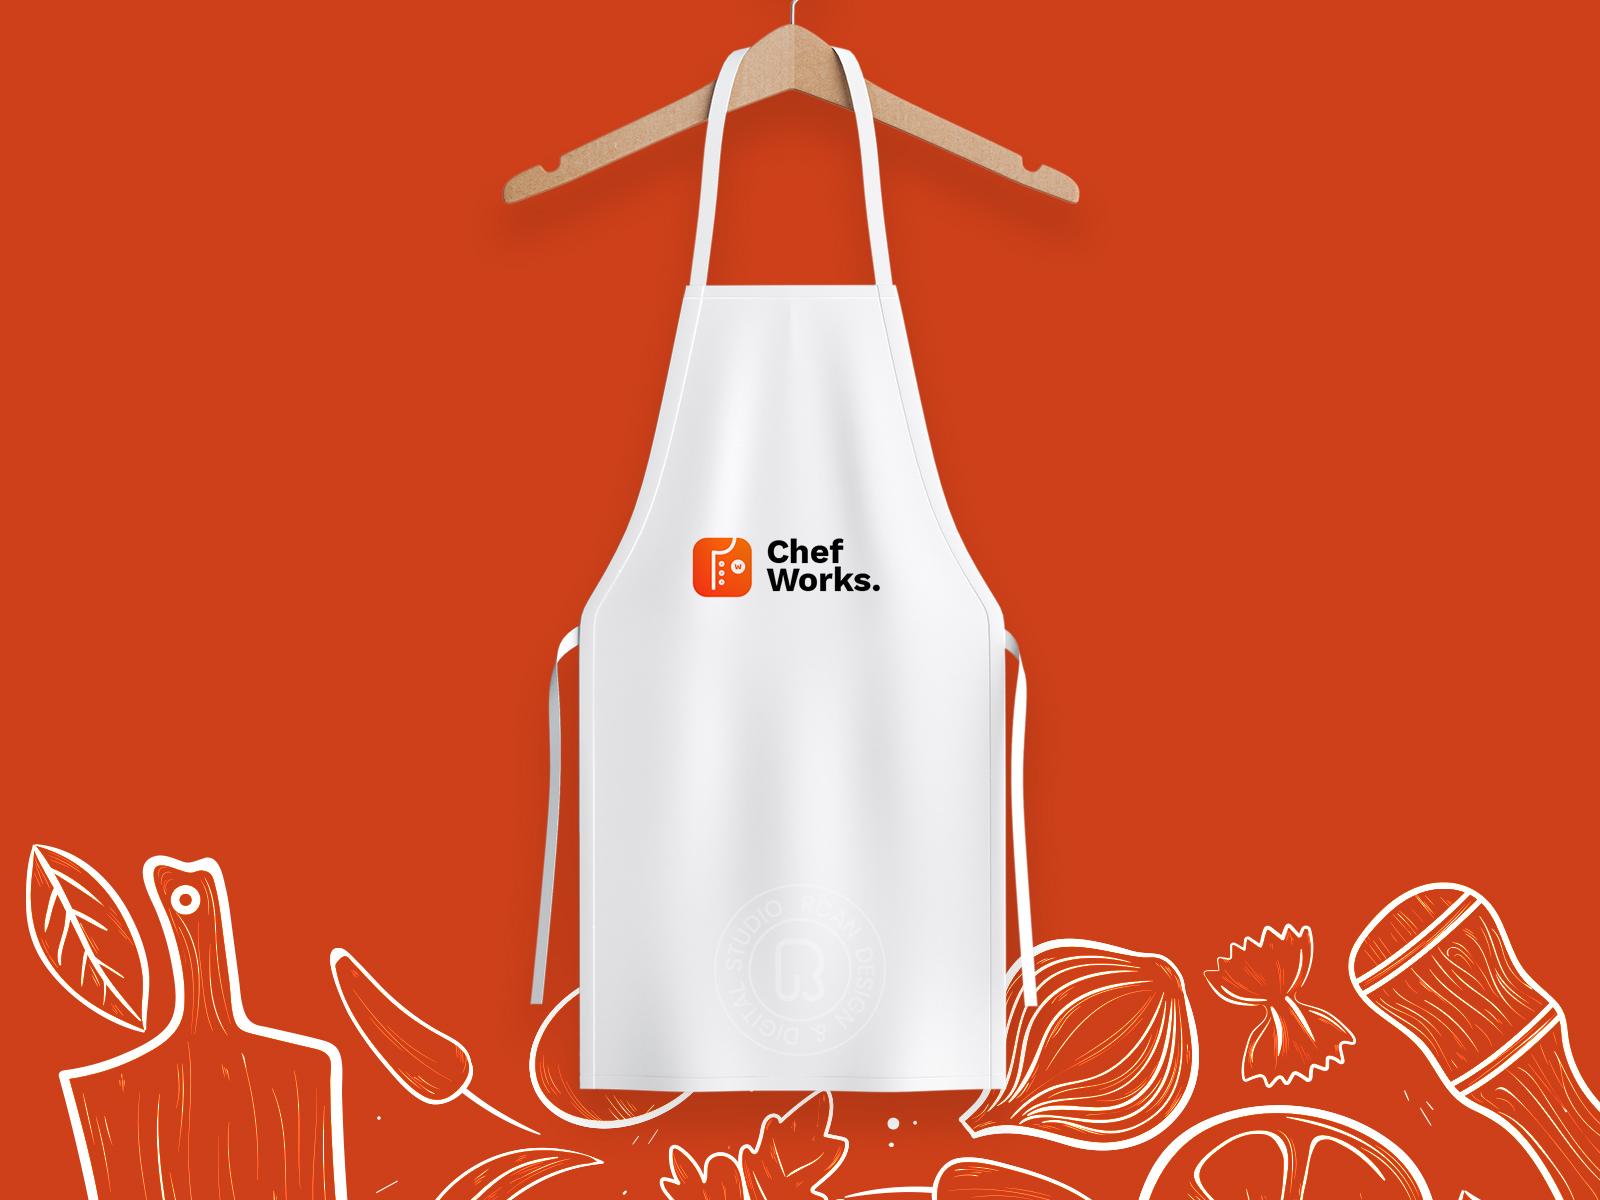 Download Apron mockup for chefworks. by Rushi Tatmiya on Dribbble